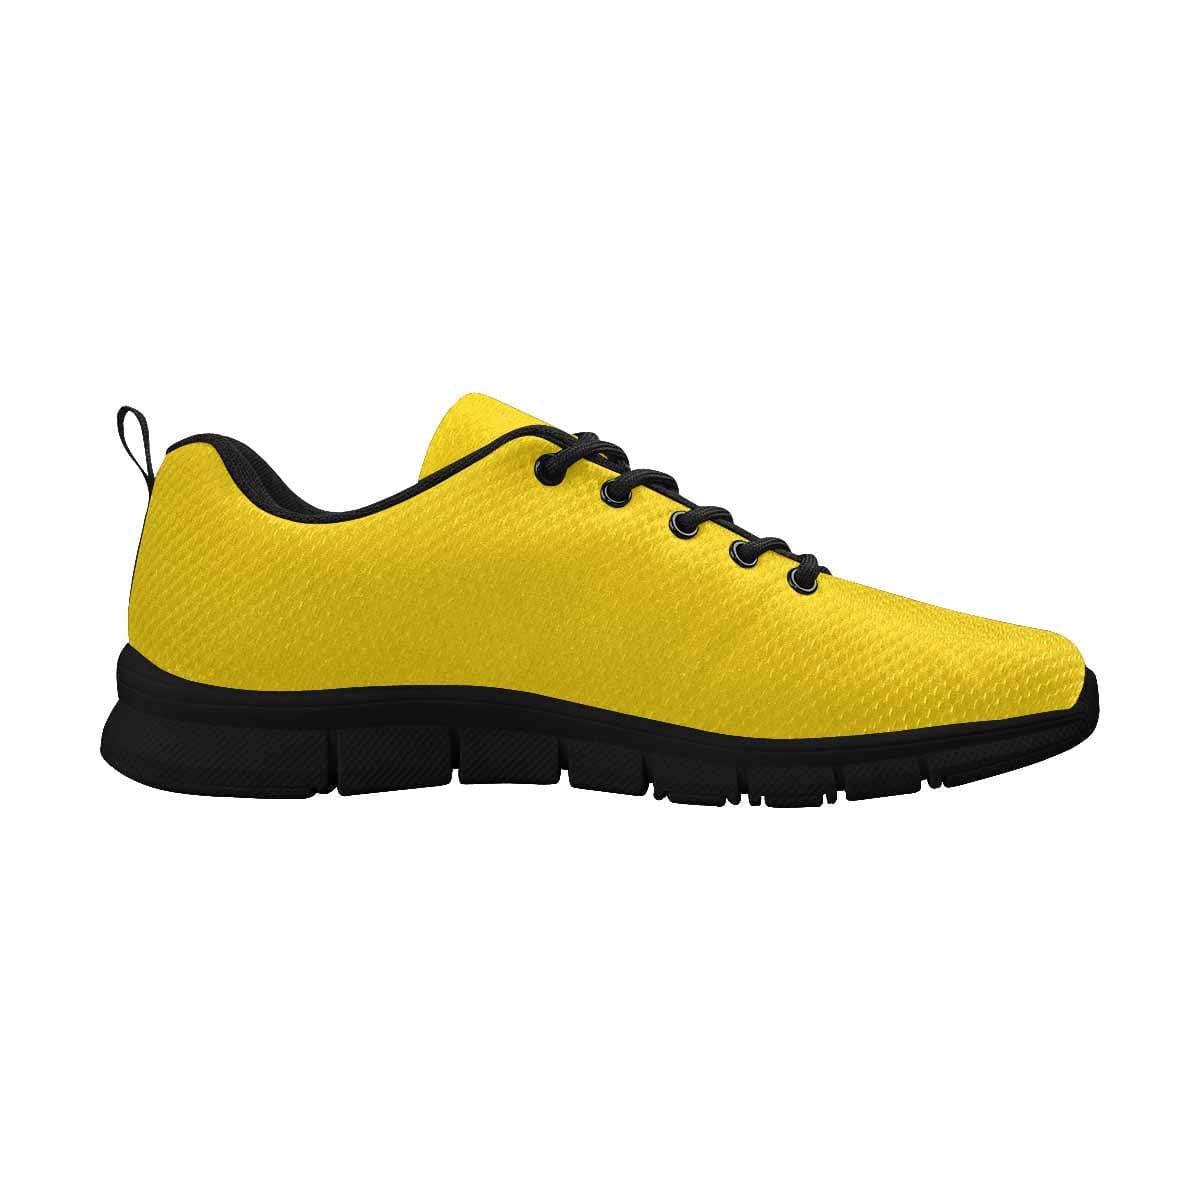 Sneakers For Men Golden Yellow - Canvas Mesh Athletic Running Shoes - Mens